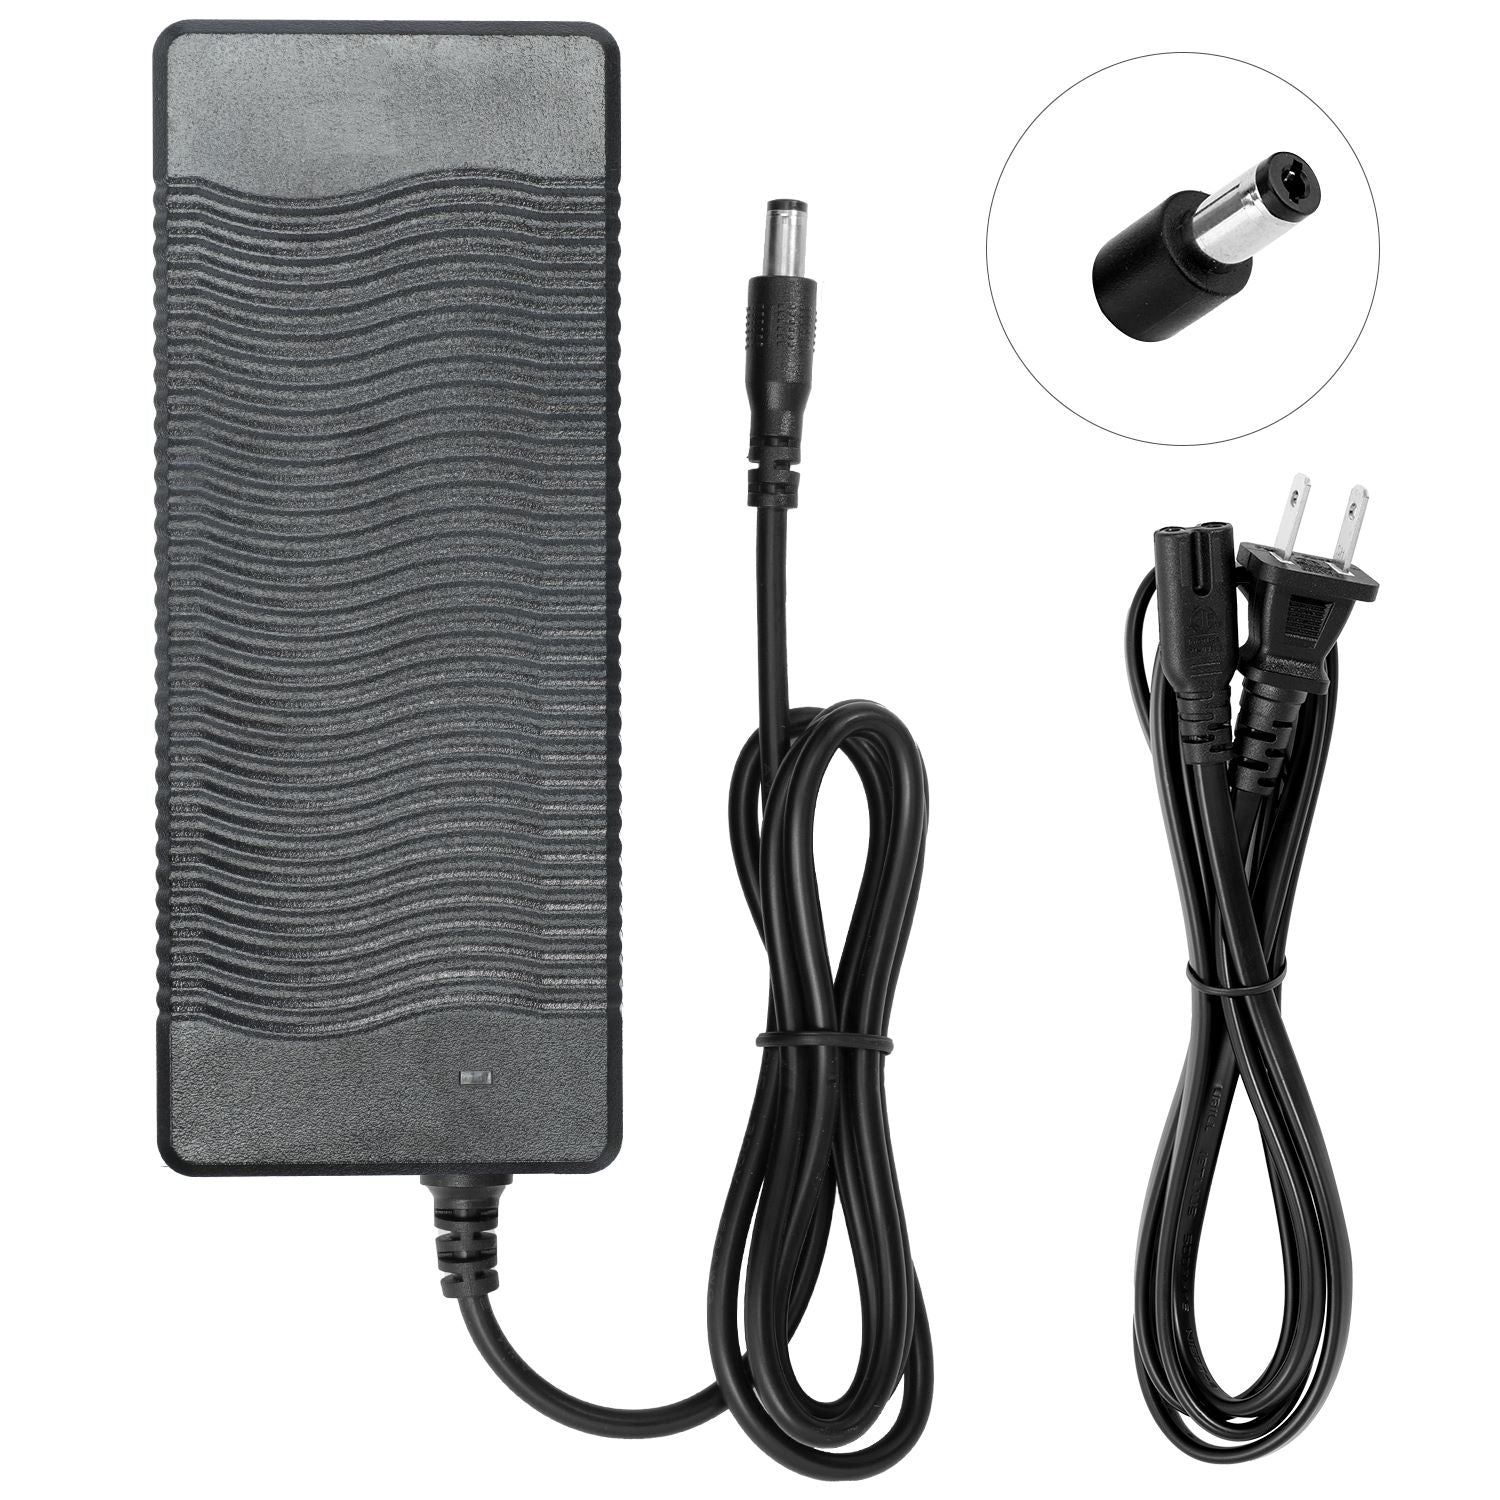 Charger for SONDORS Electric Bike